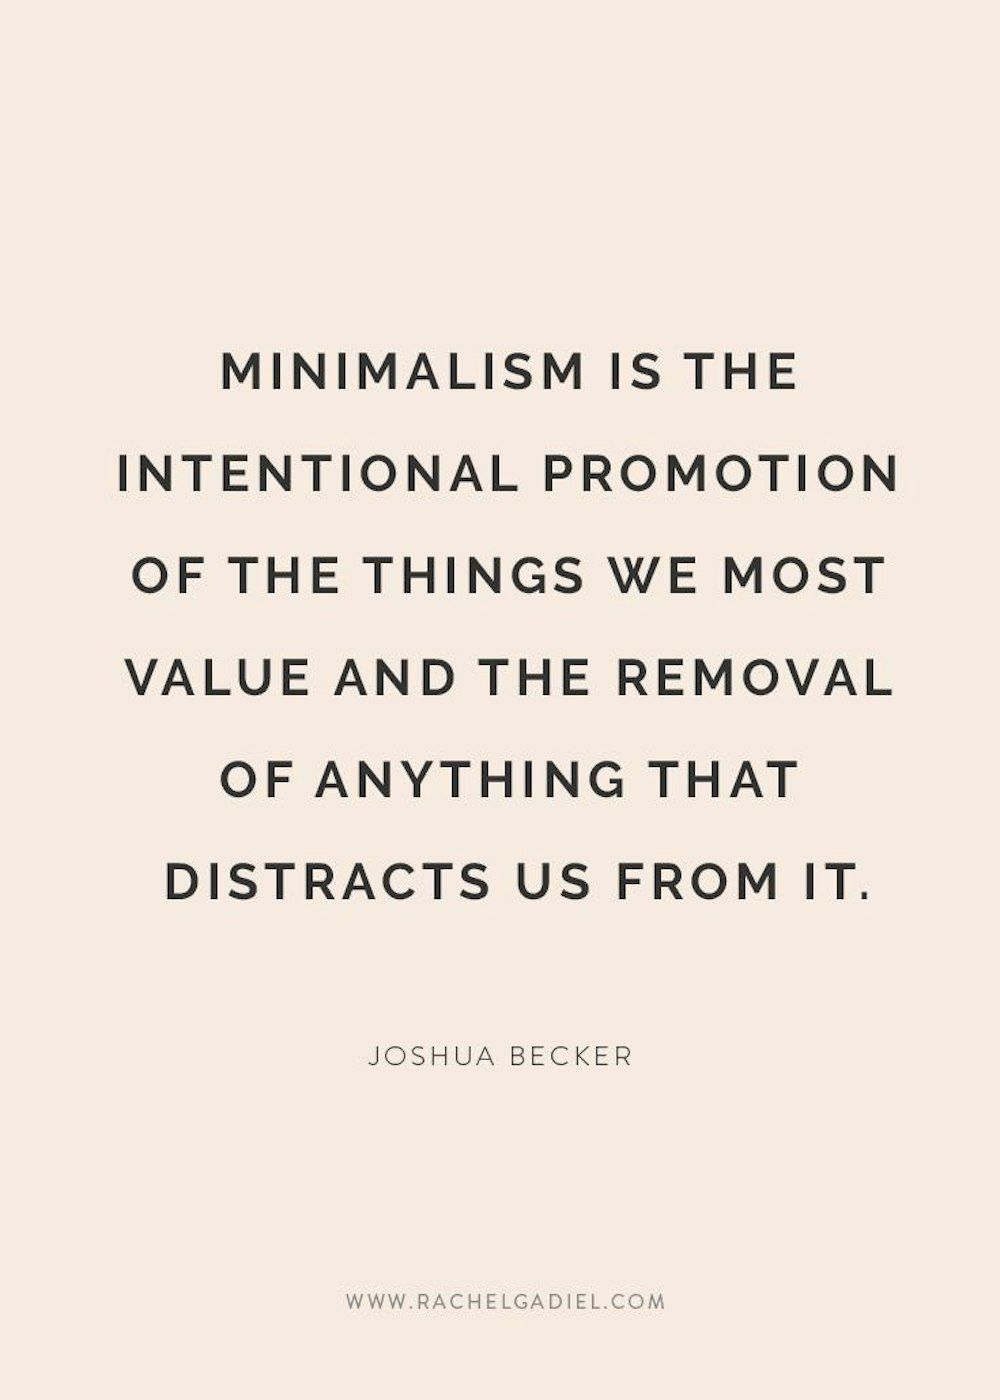 How to become a minimalist